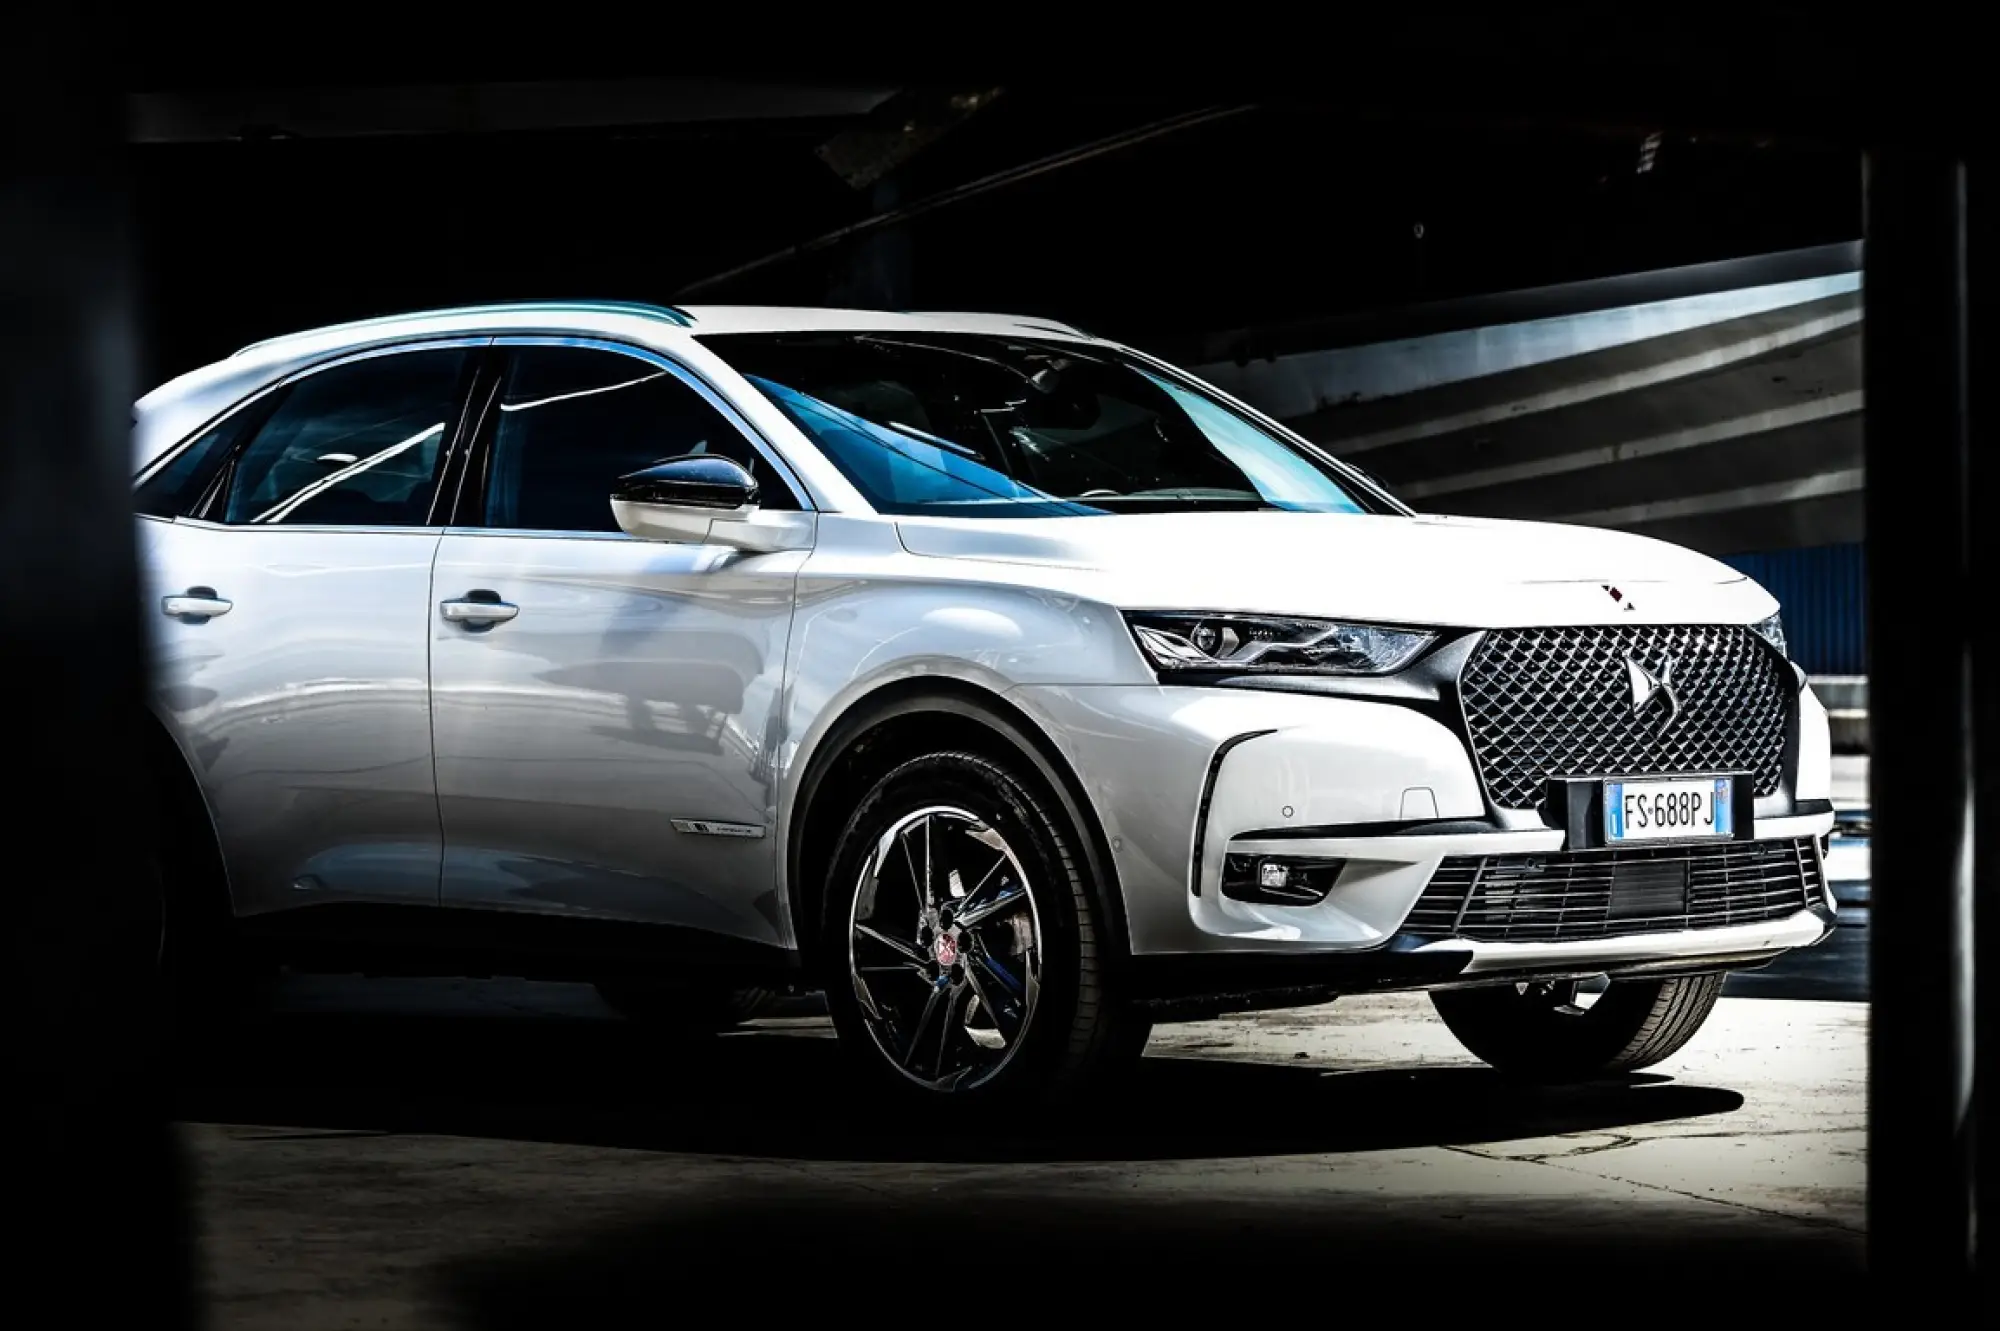 DS 7 Crossback - Gallery performance line - 2